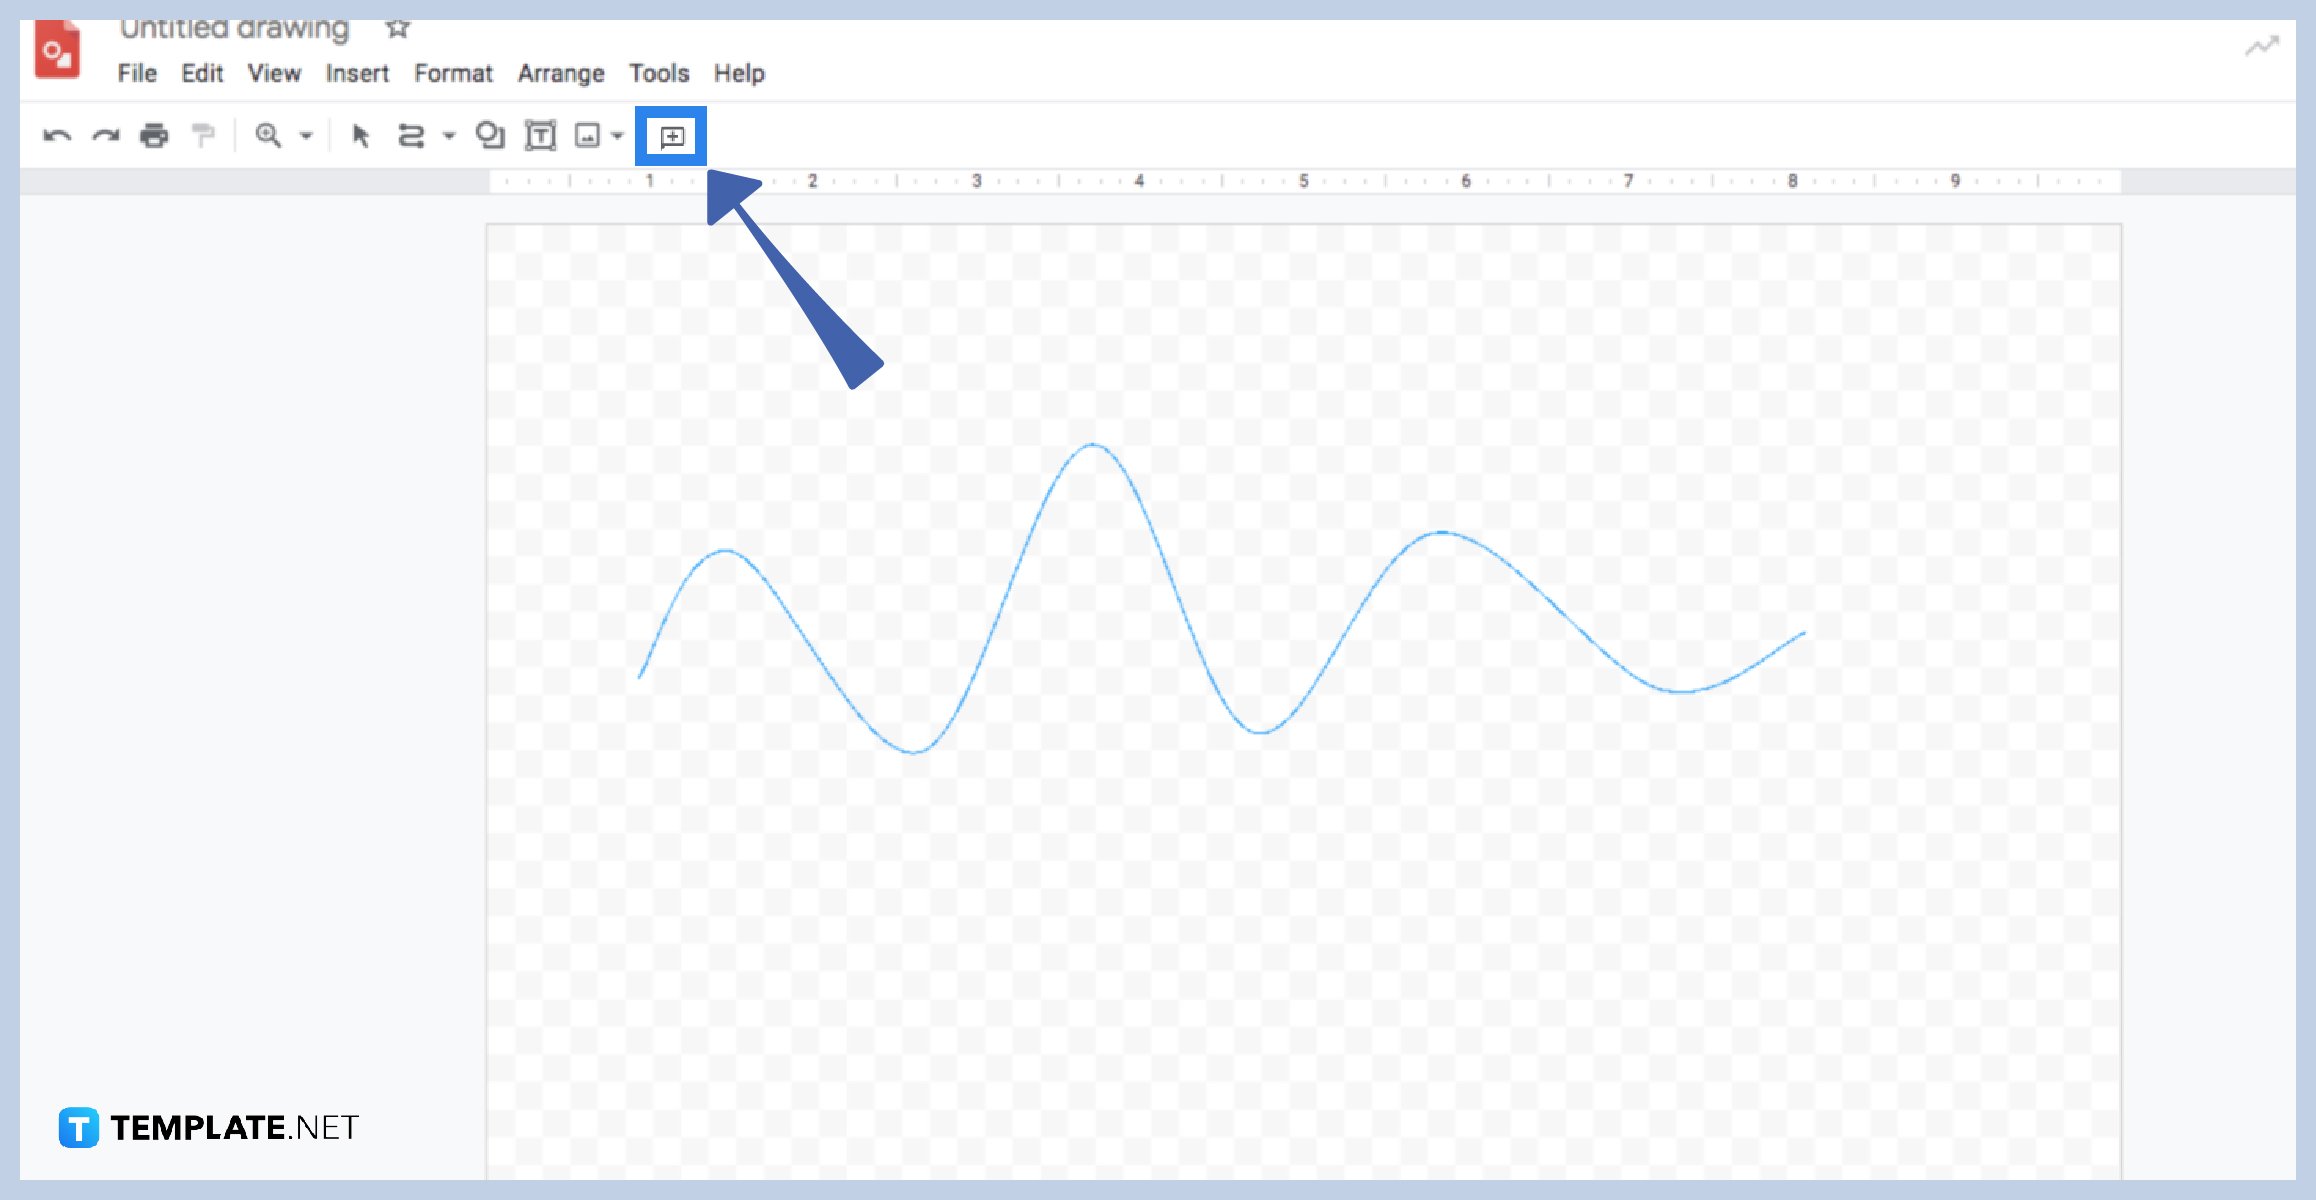 How to Use the Curve Tool in Google Drawings